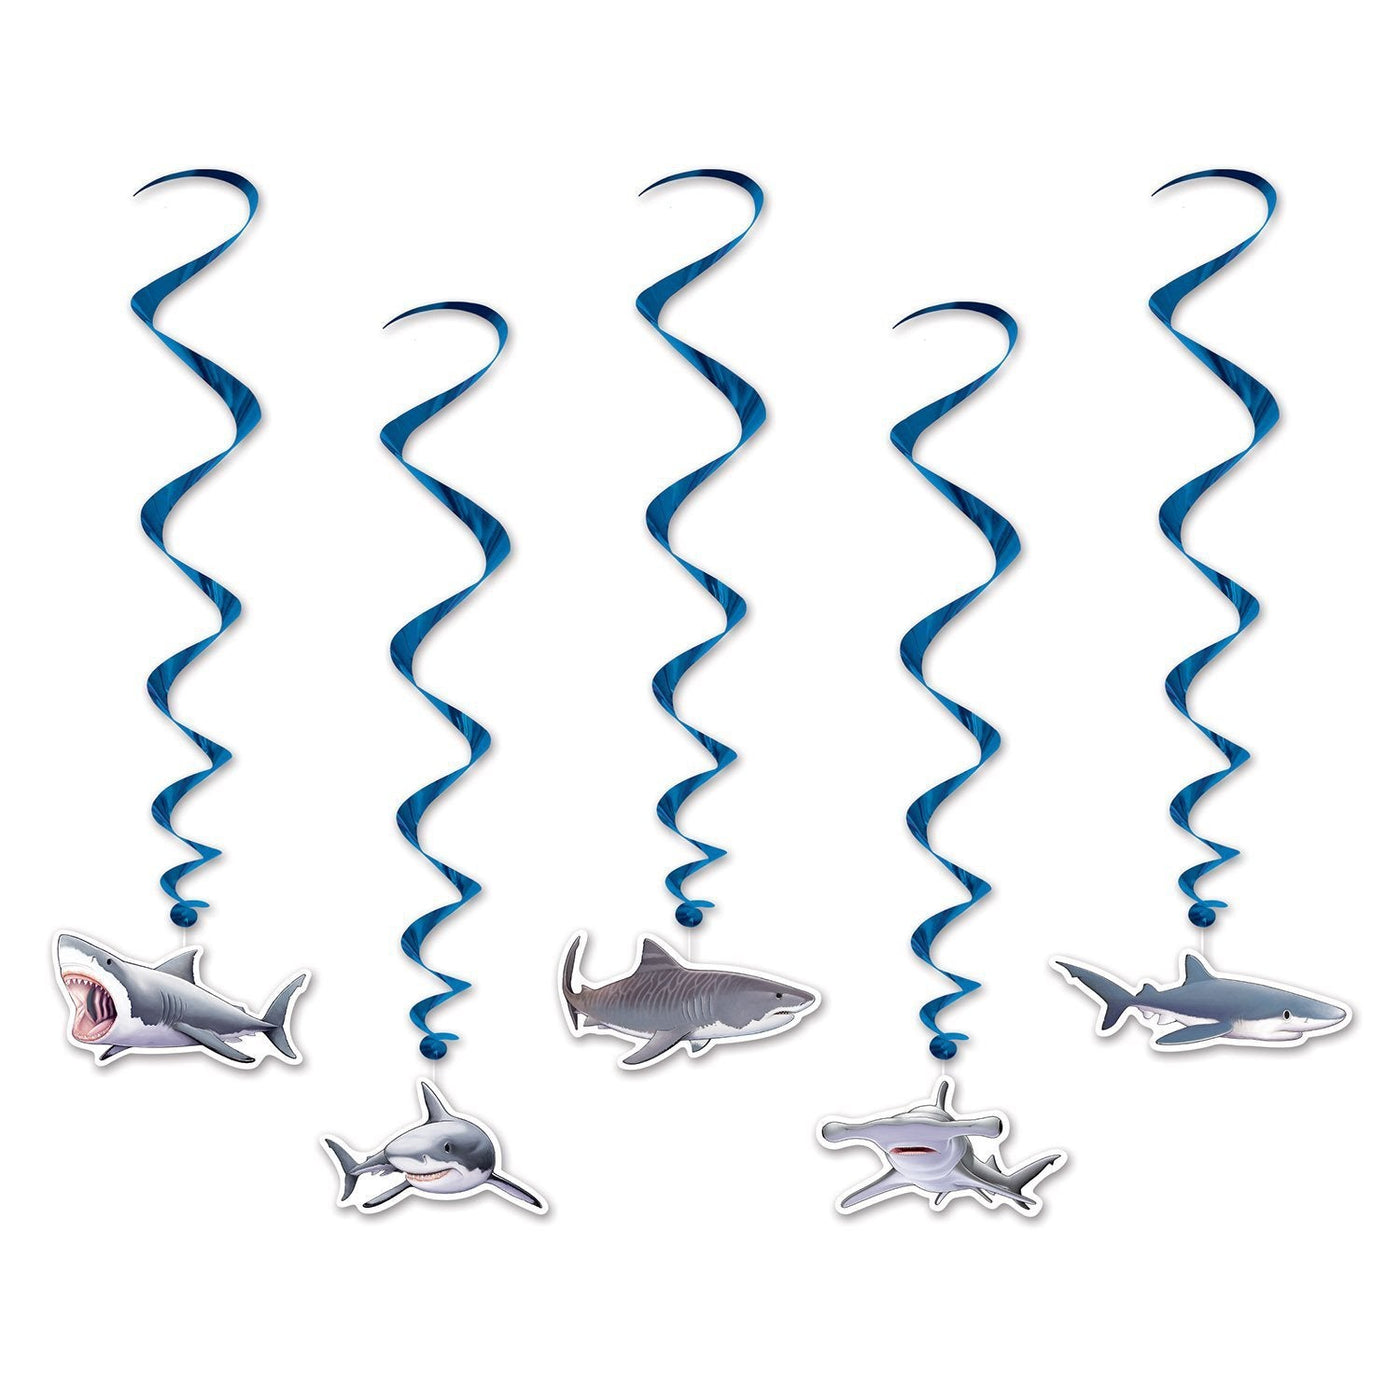 Shark Whirl Decorations 5pc - JJ's Party House